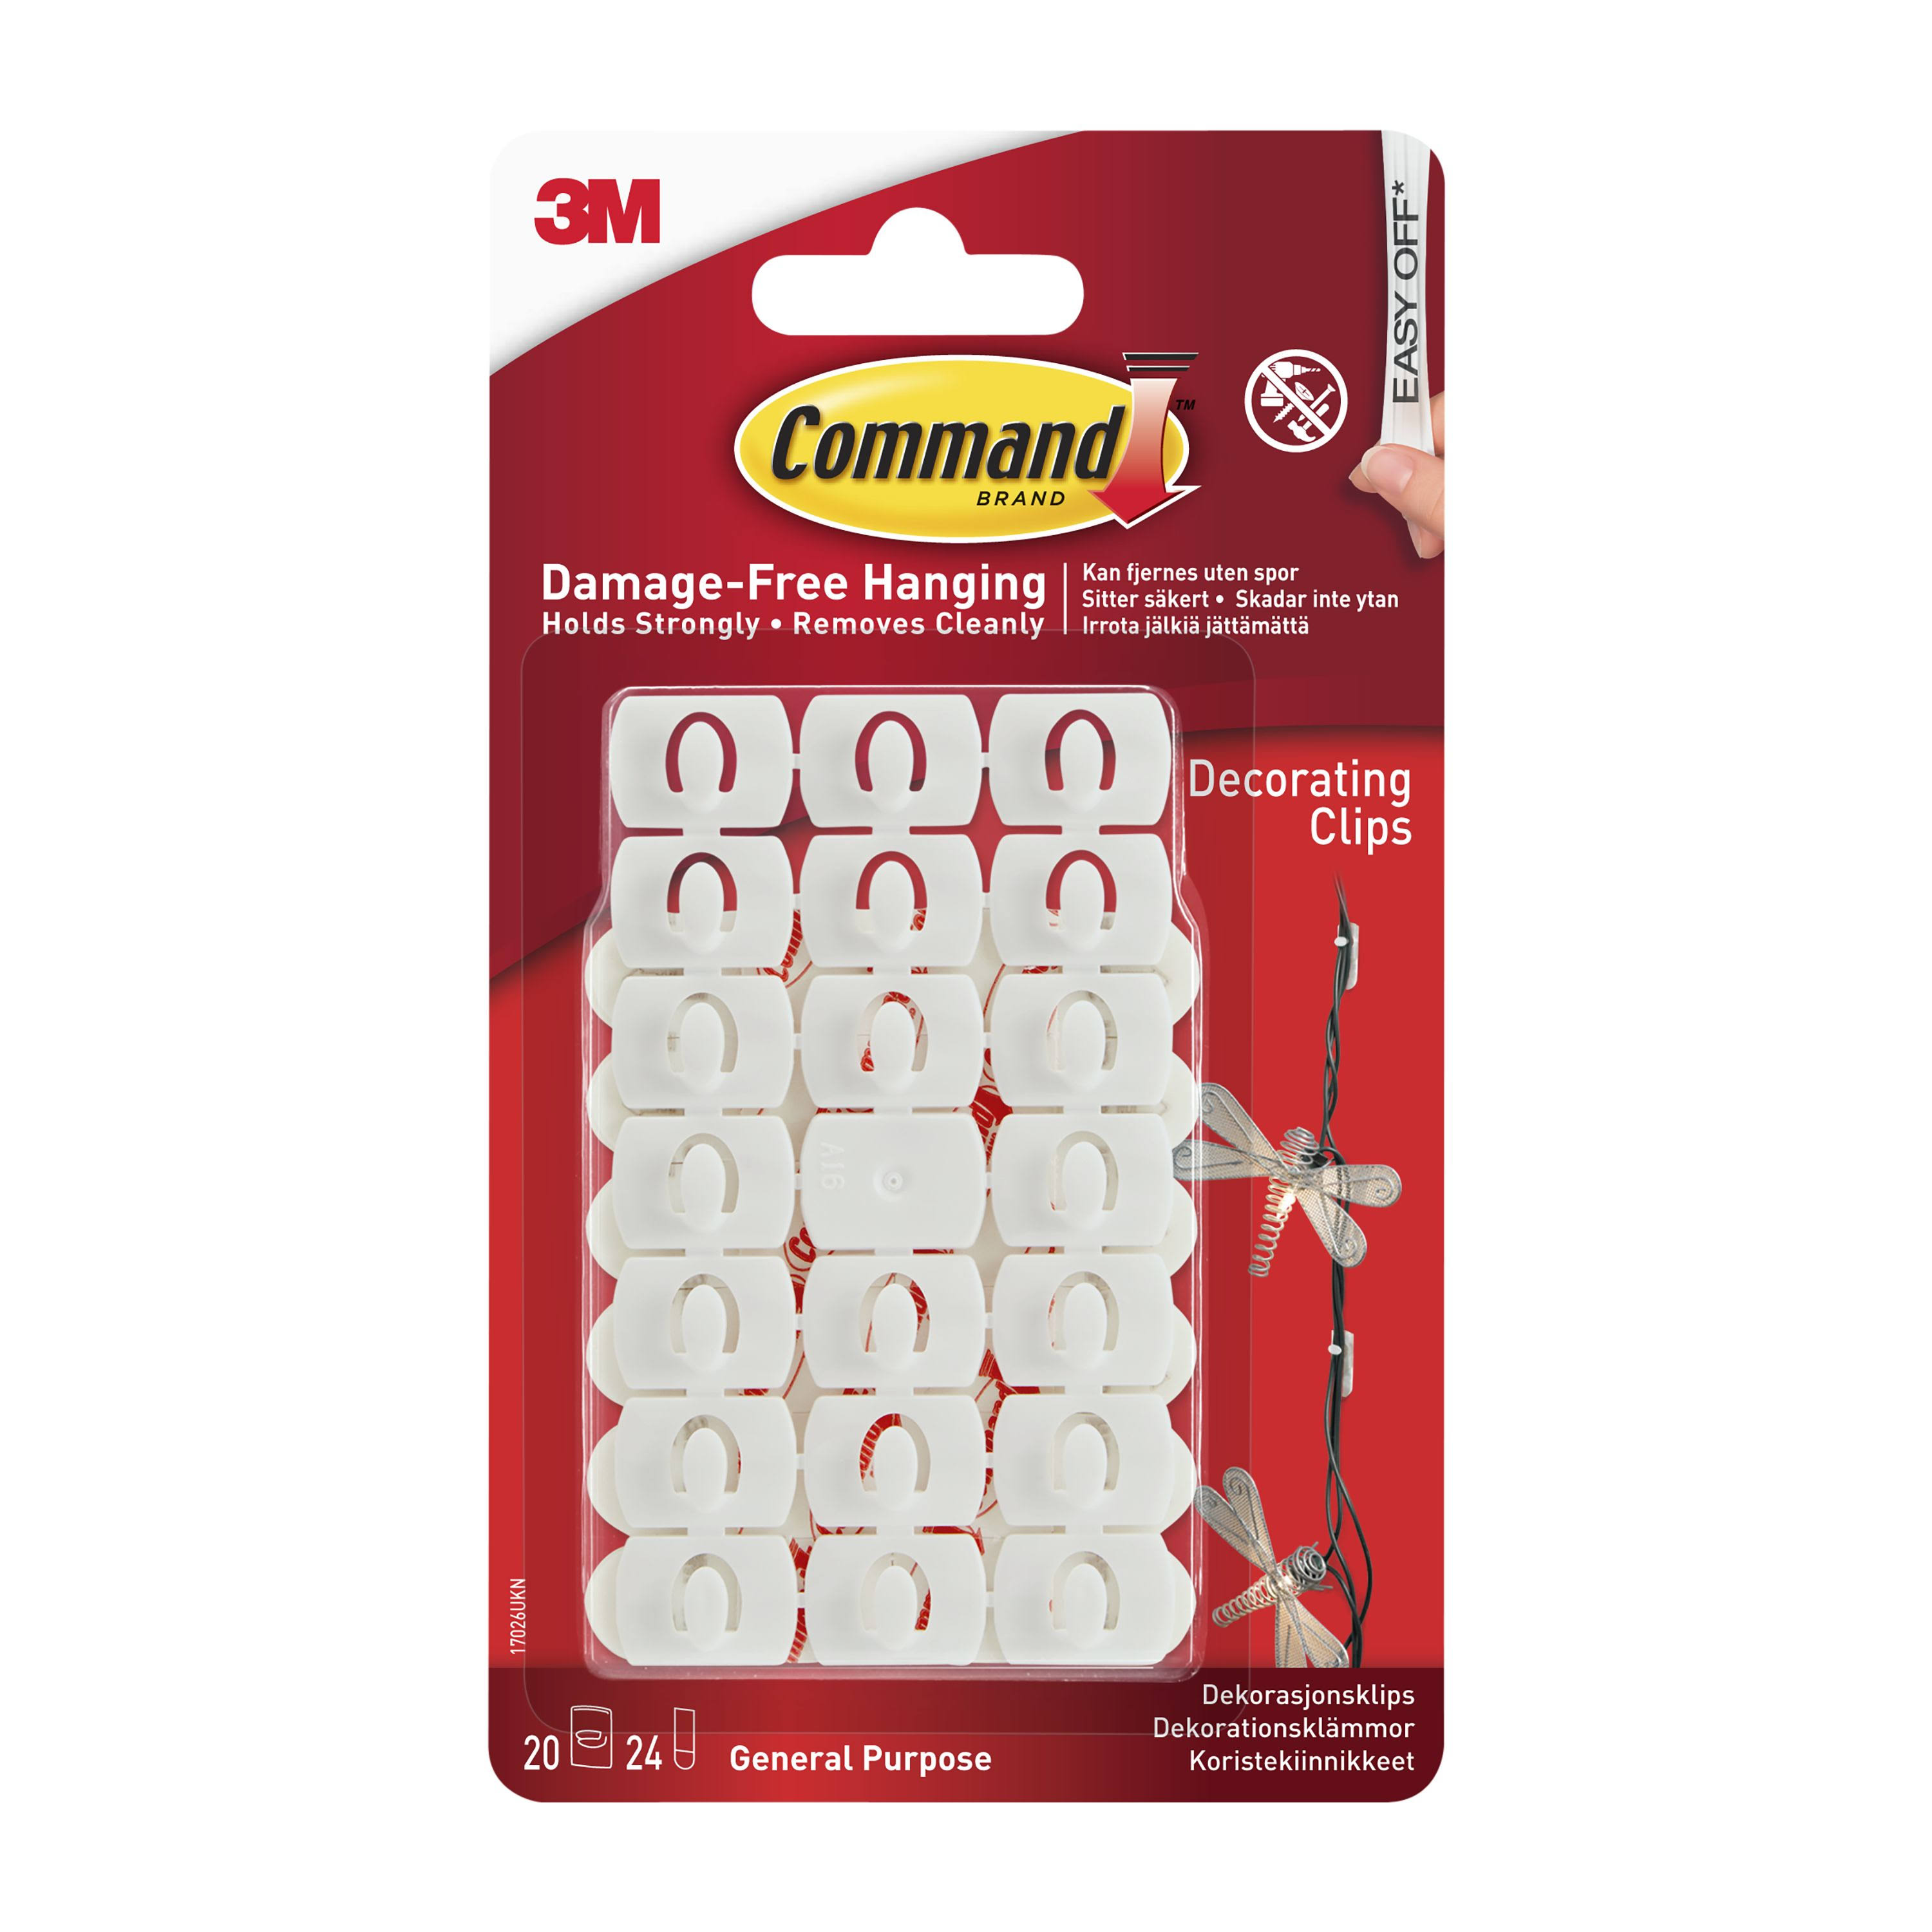 3M Command Brand Decorating Clips